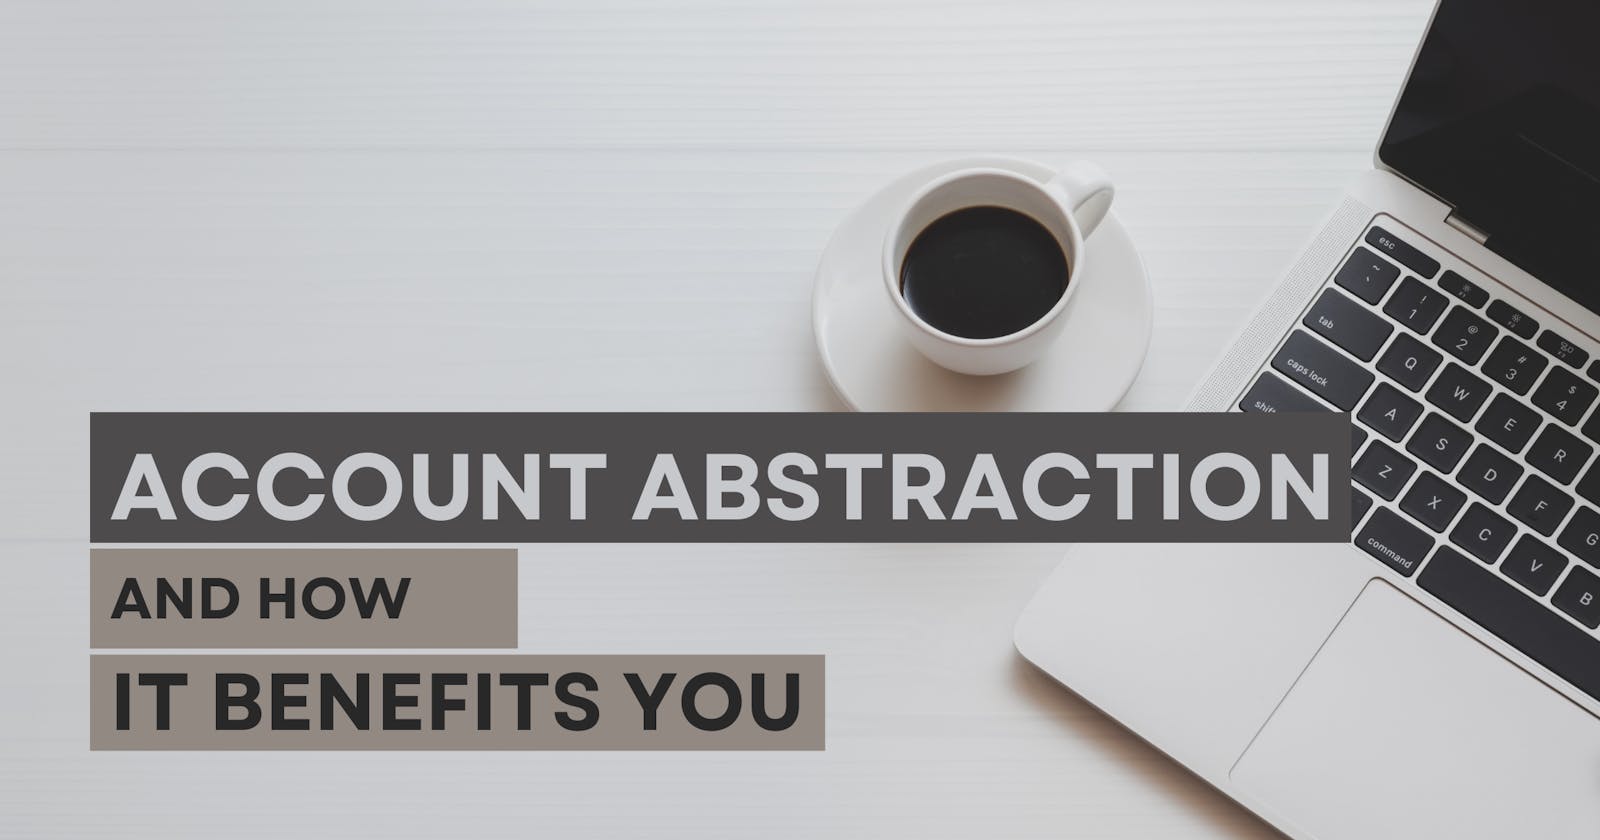 Account Abstraction and How it Benefits You